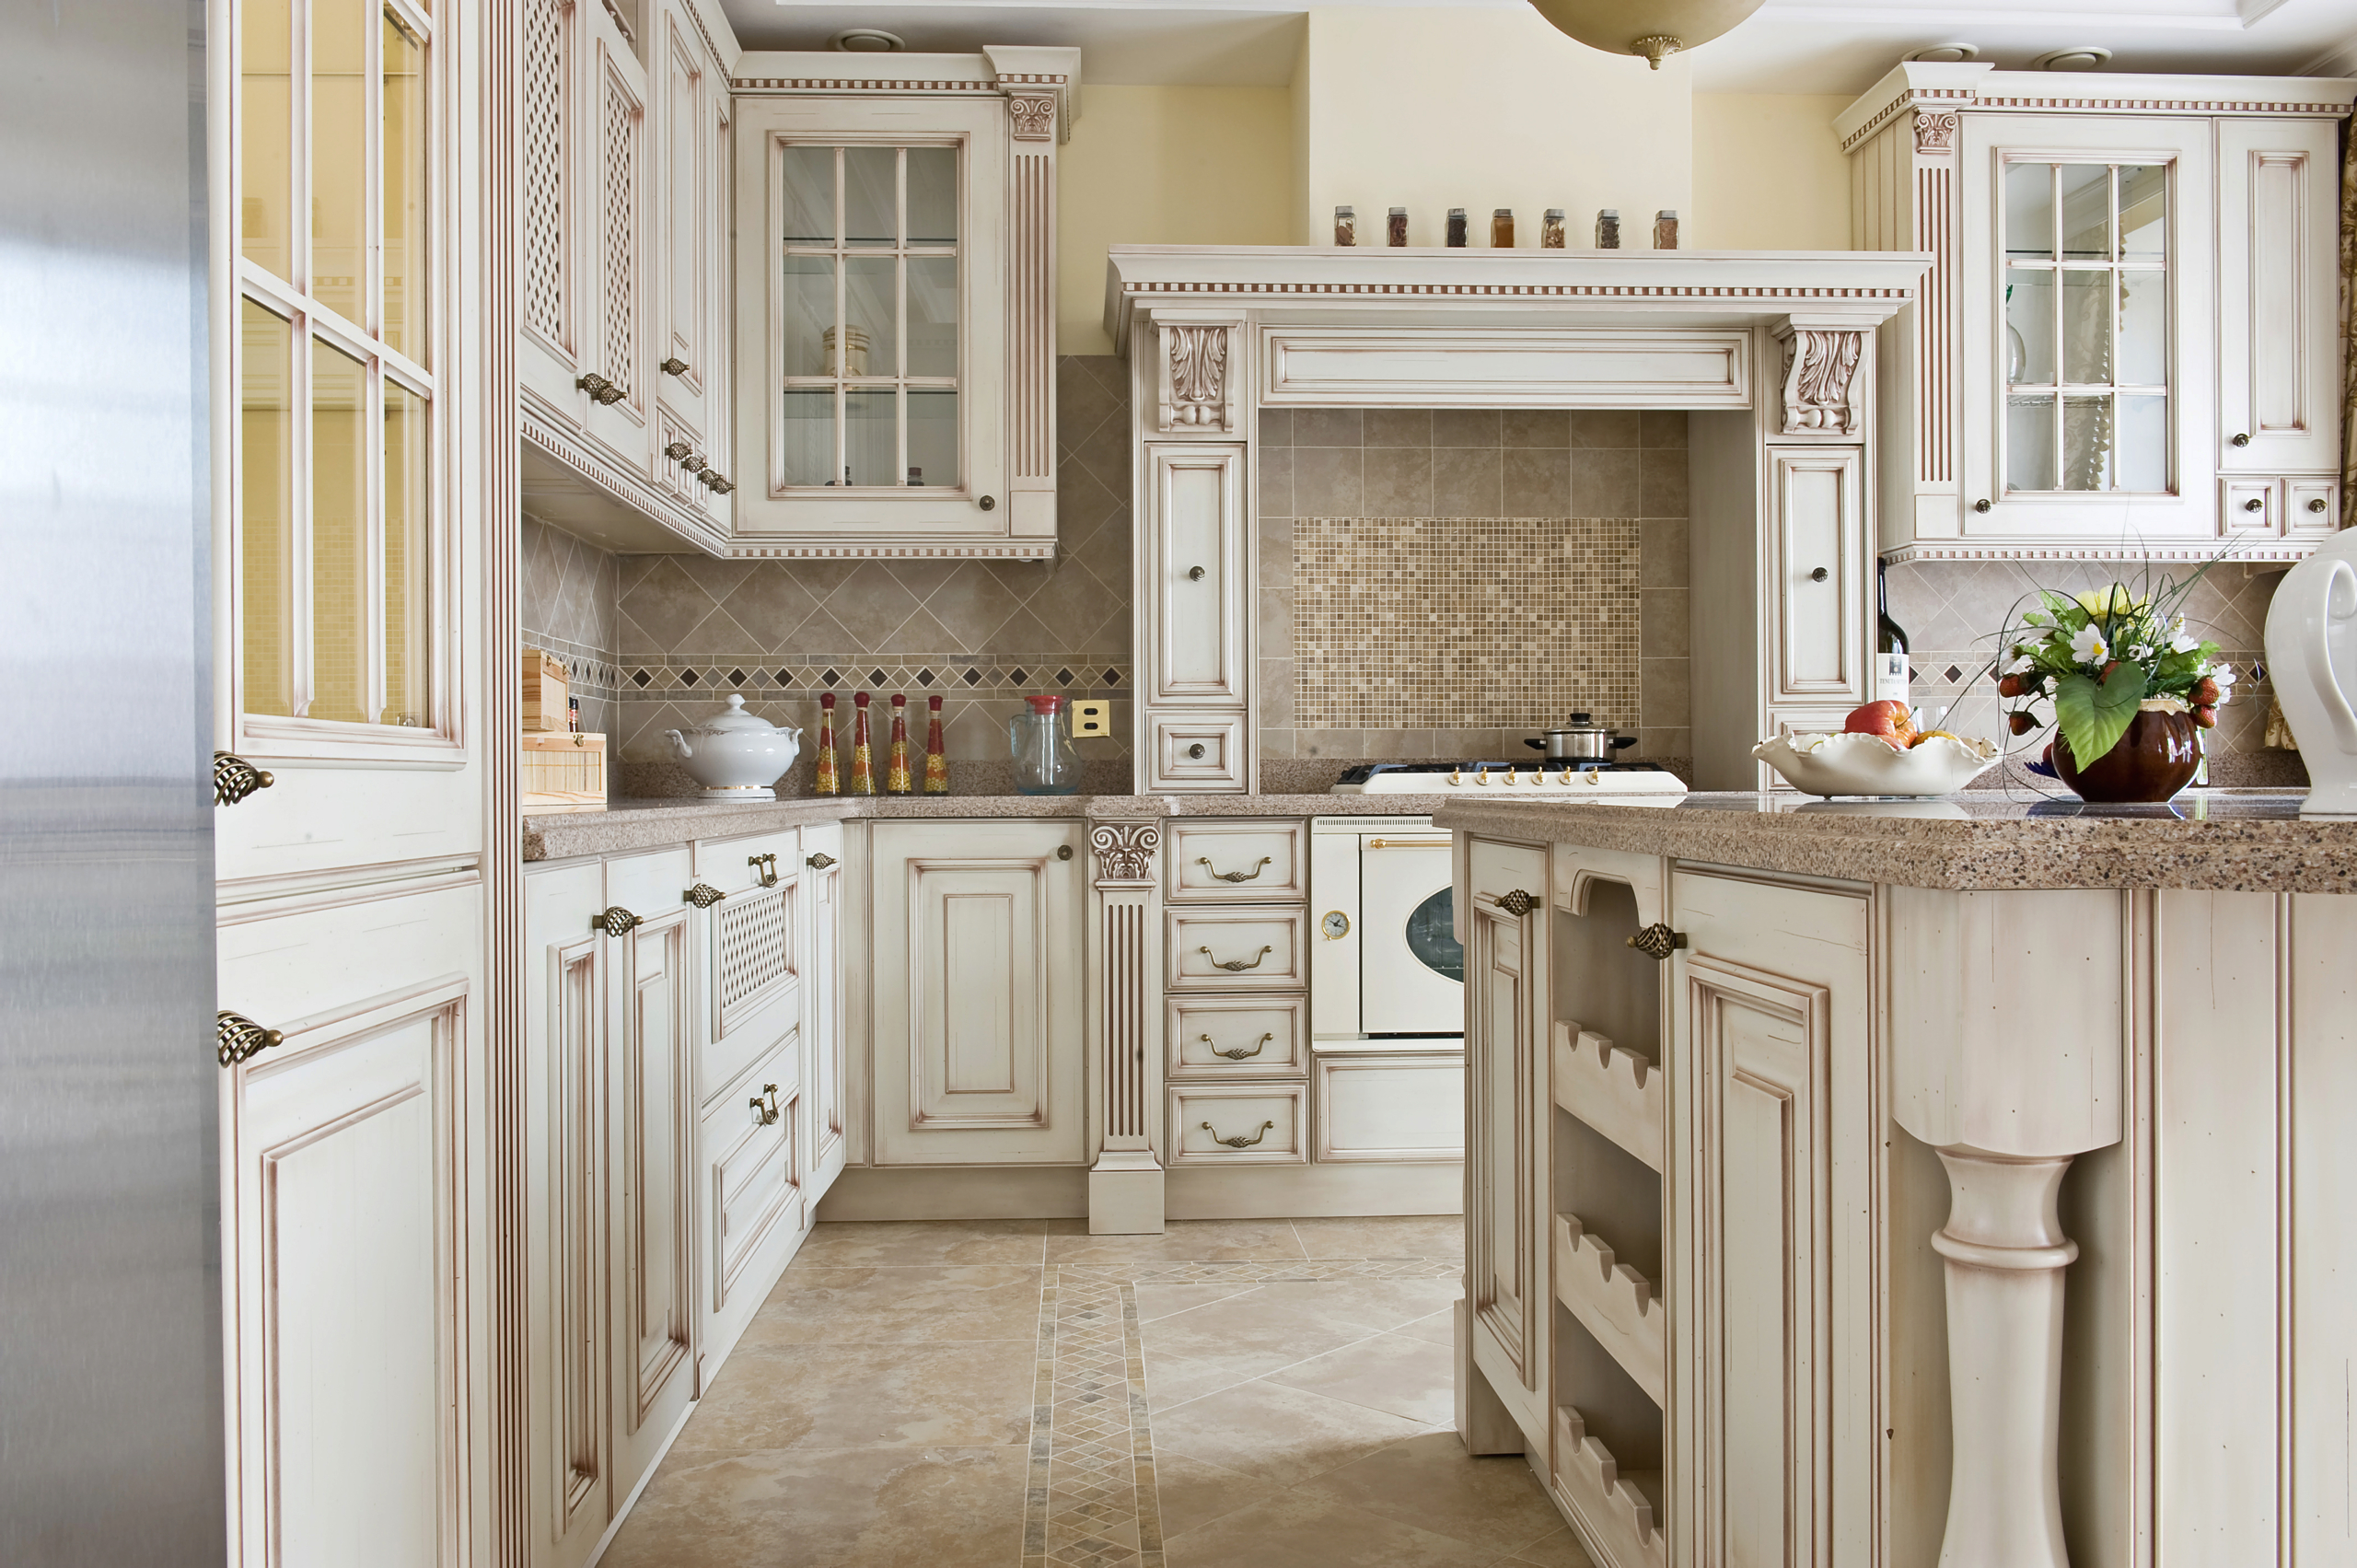 Antique White Kitchen Cabinets You Ll Love In 2021 Visualhunt